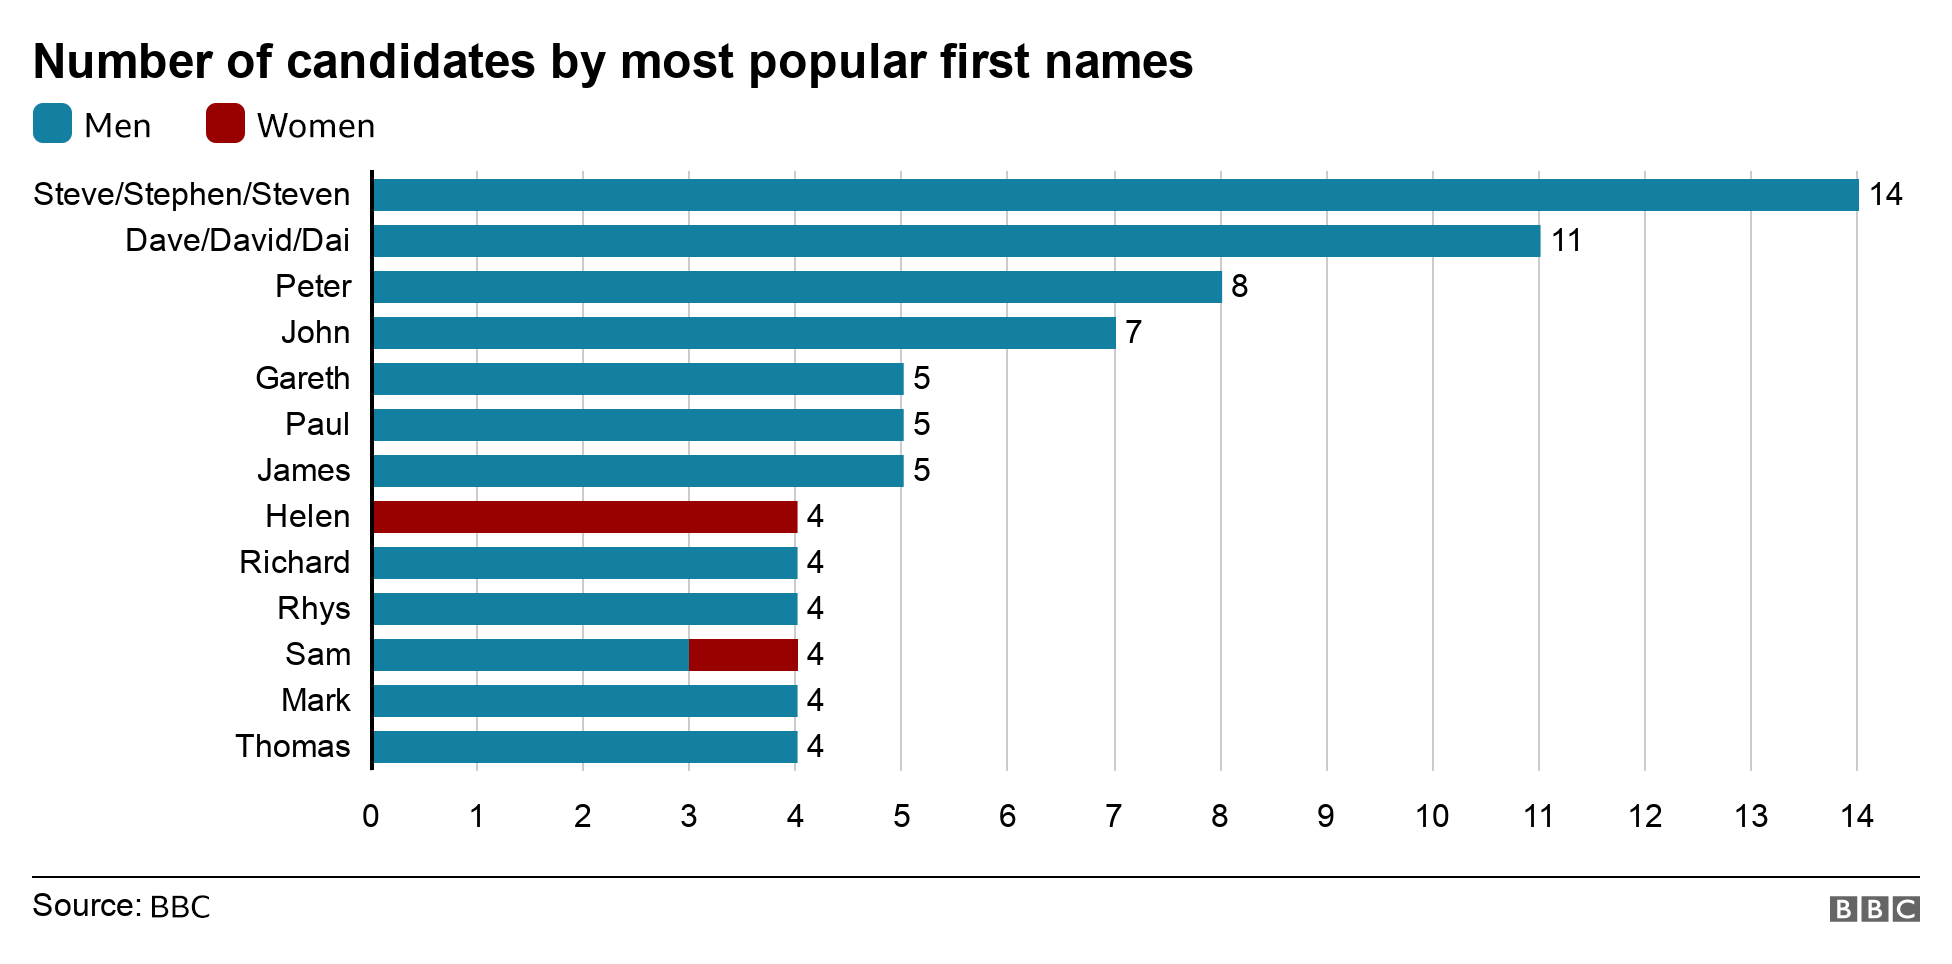 Graphic showing the number of candidates by most popular first names